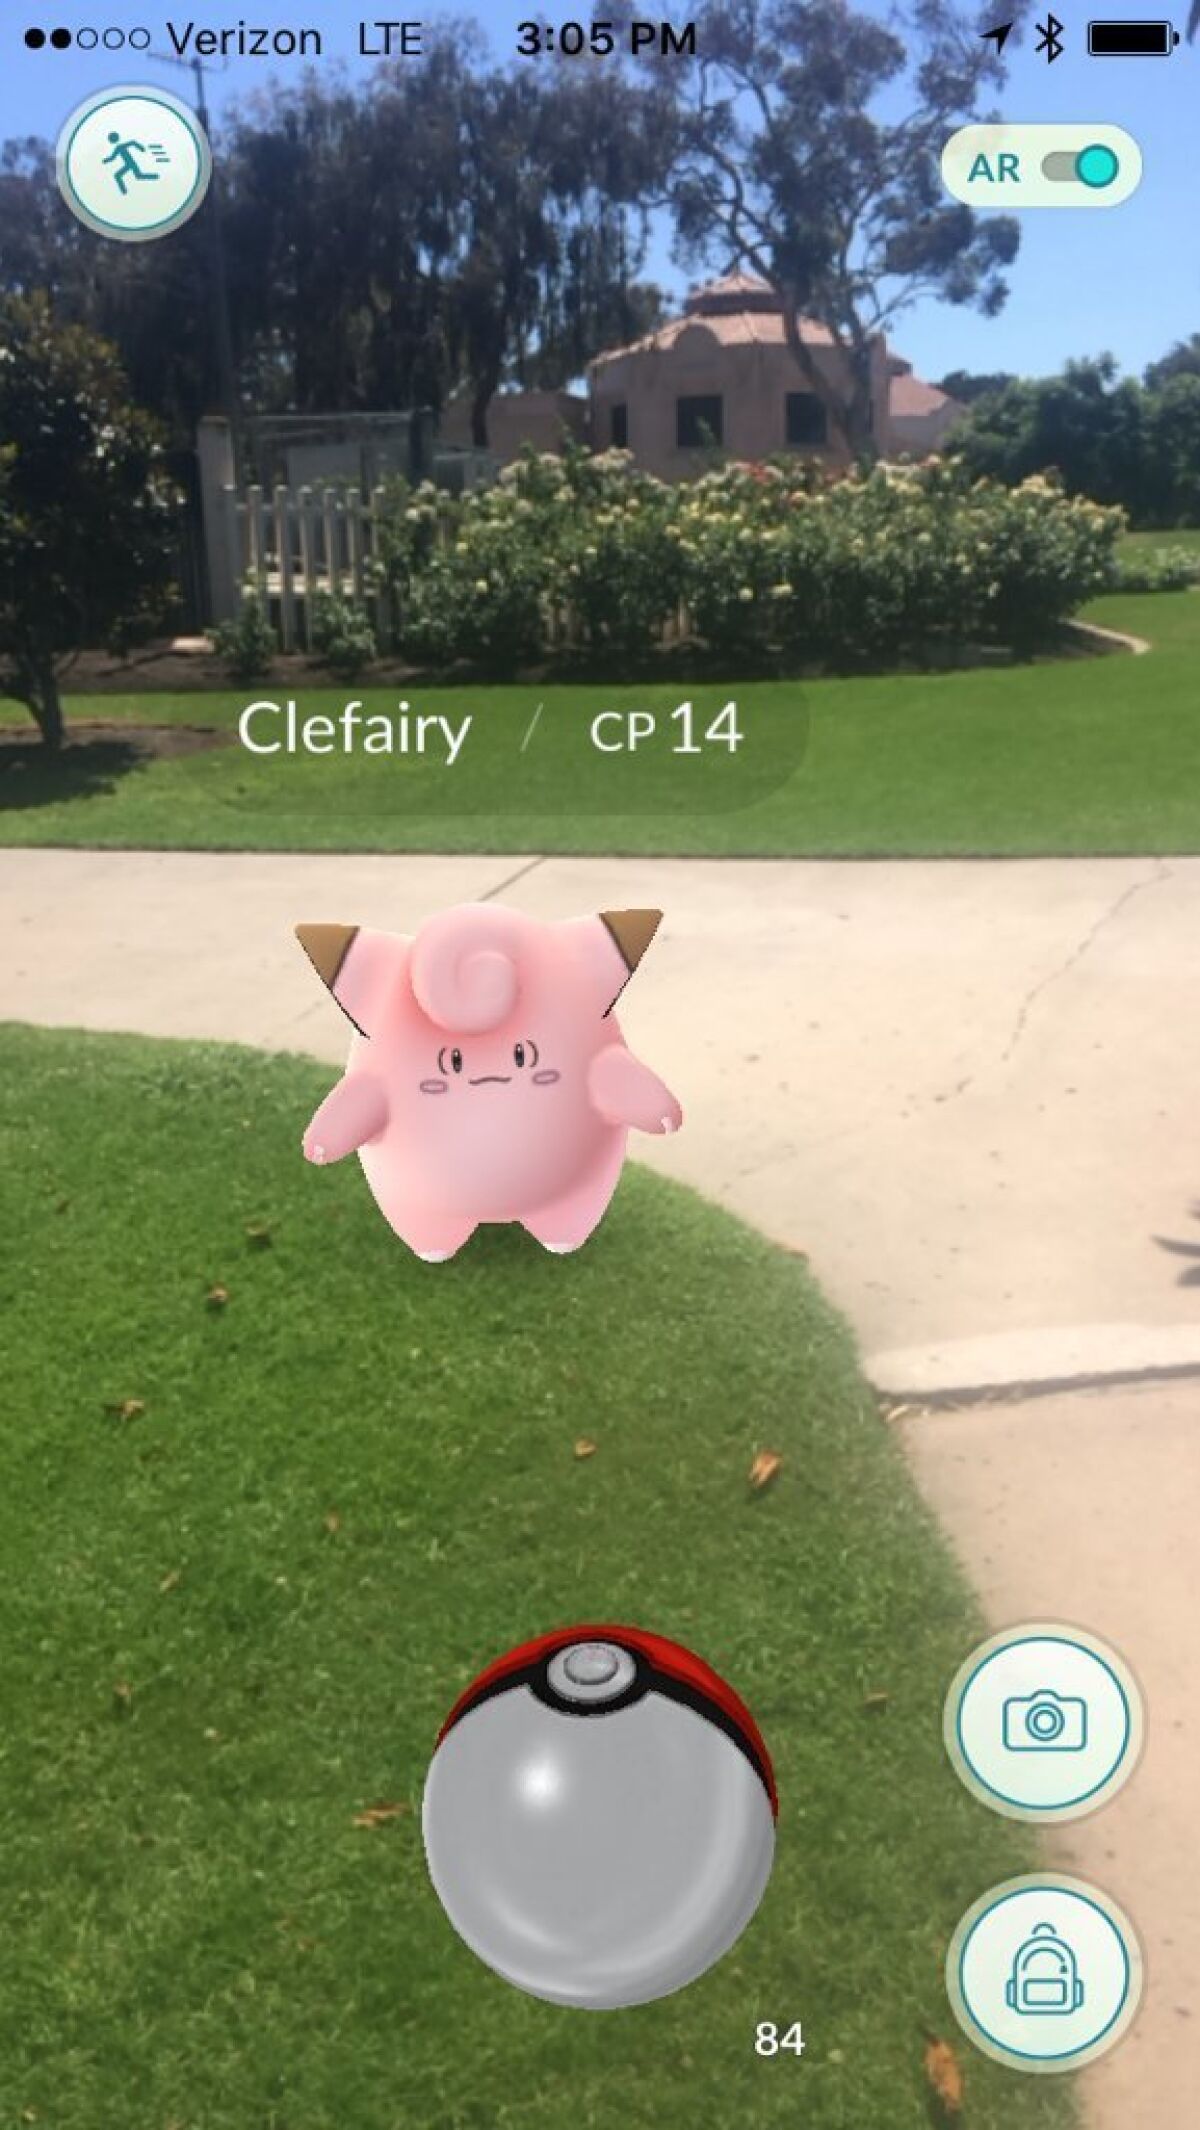 A Clefairy, a fairy-type Pokemon, appears in Balboa park. Philip Molnar